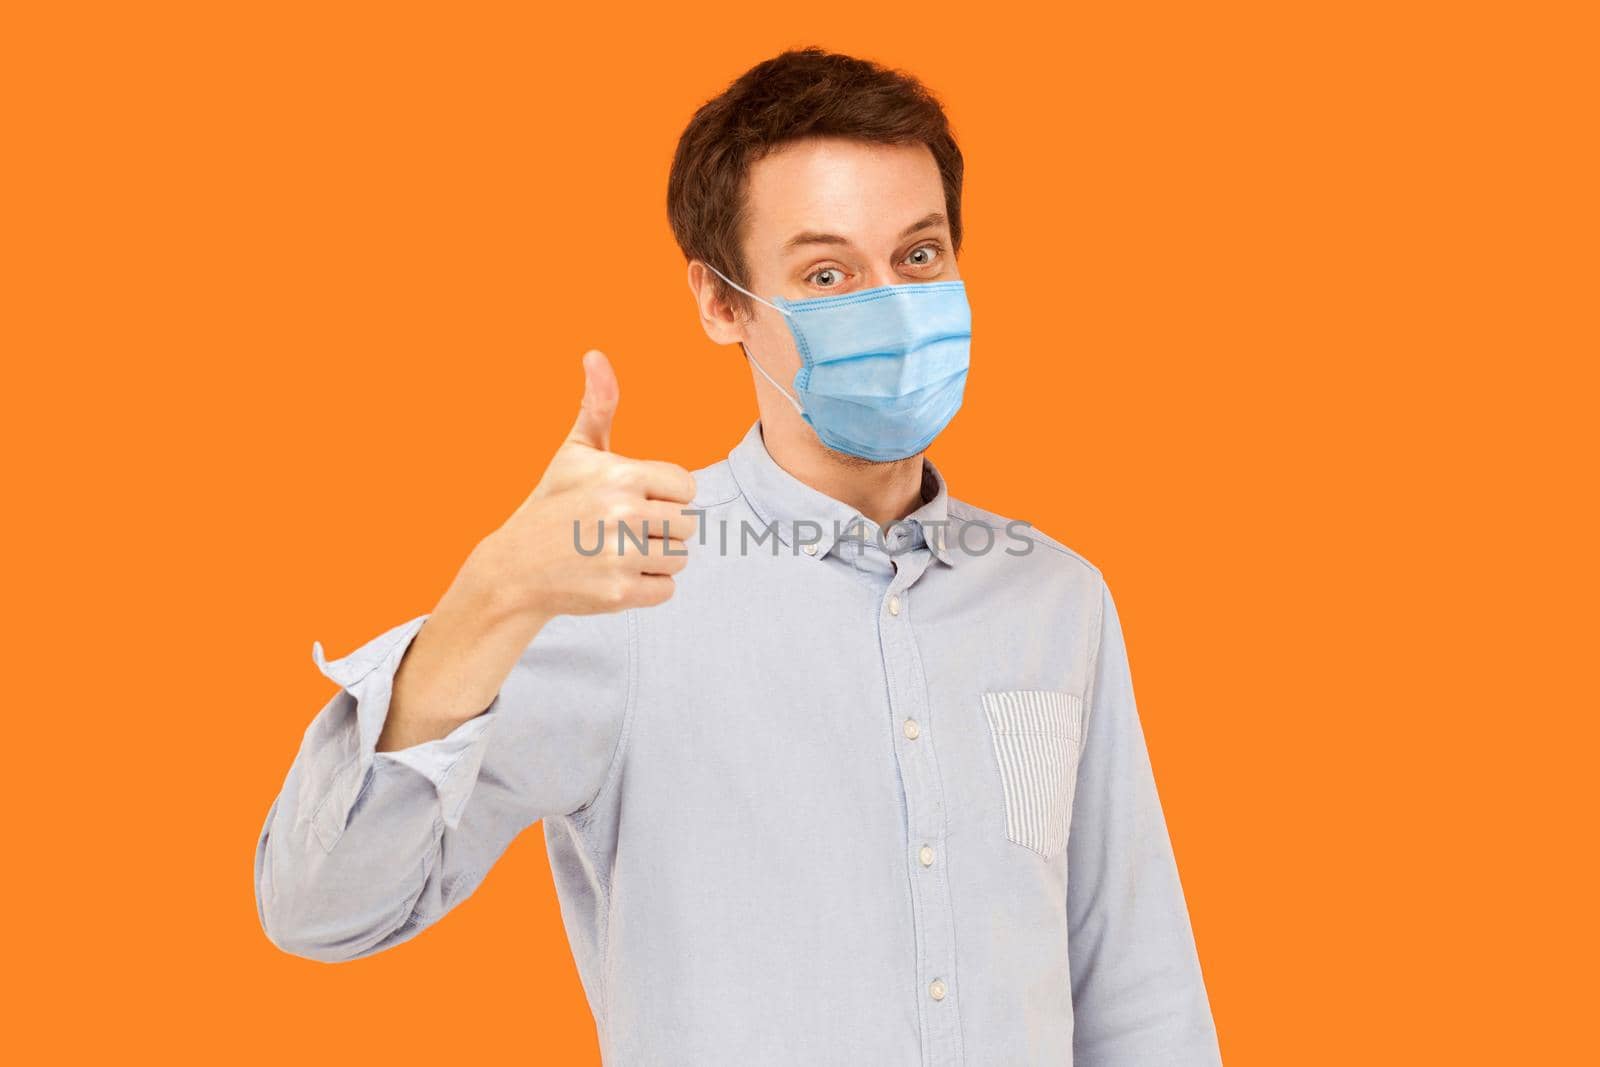 Like. Portrait of satisfied young worker man with surgical medical mask standing thumbs up and looking at camera smiling. indoor studio shot isolated on orange background.